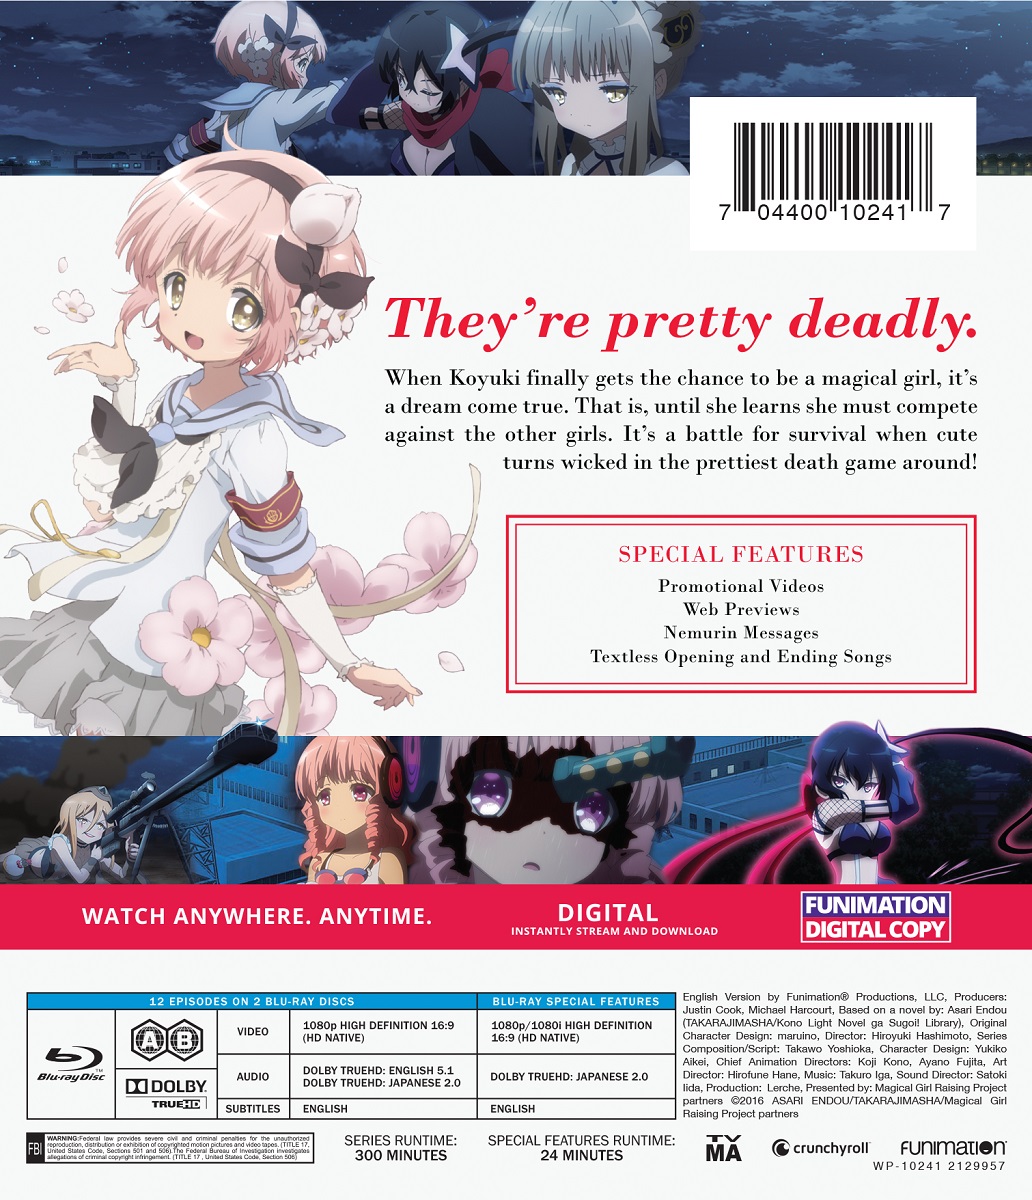 Magical Girl Magical Destroyers] Clear File Blue – Character Goods -  animate USA Online Shop